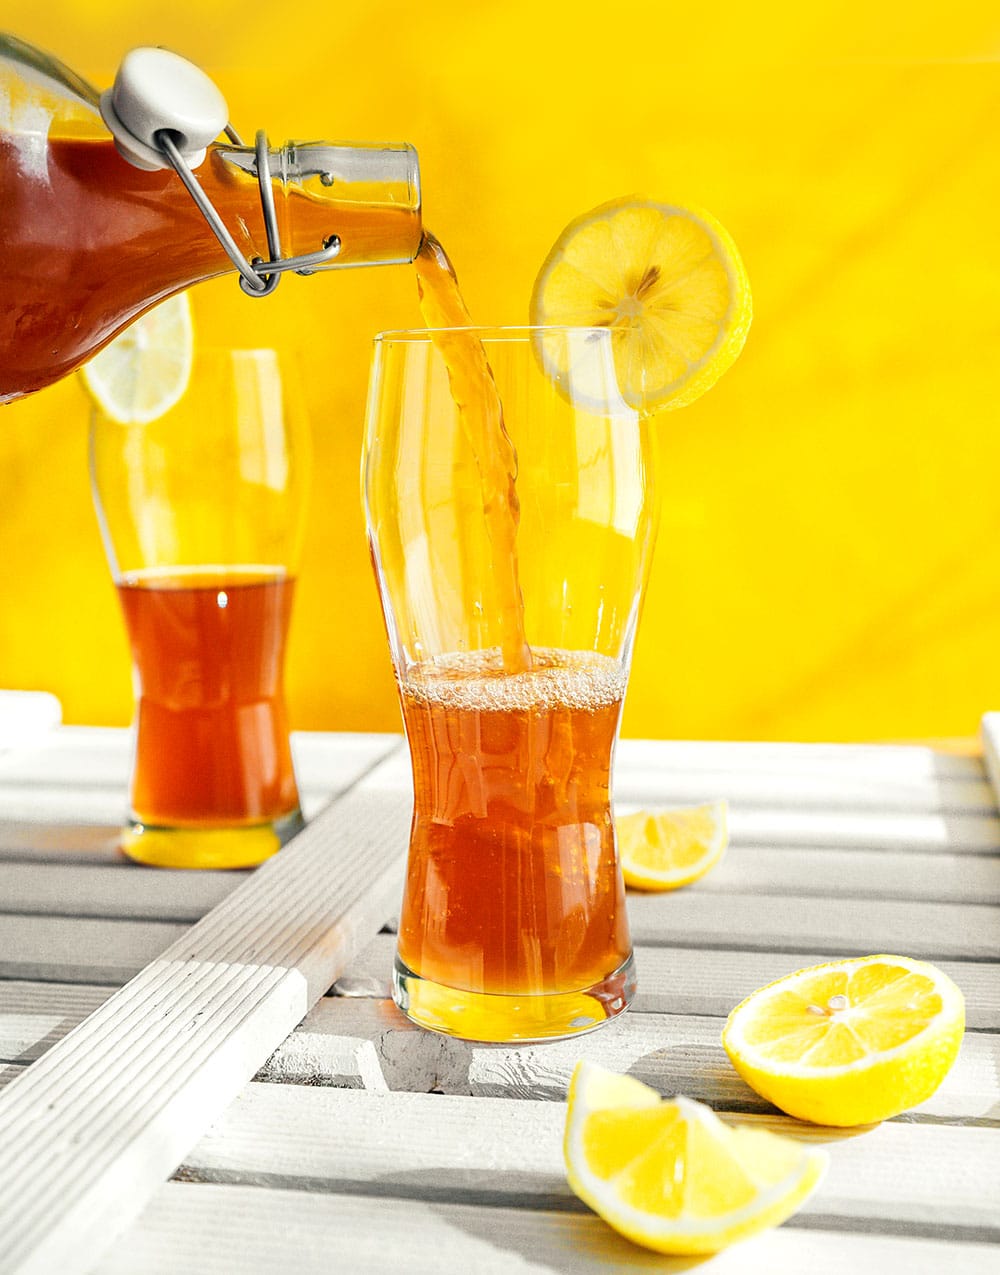 Pouring kombucha into a glass with a yellow background